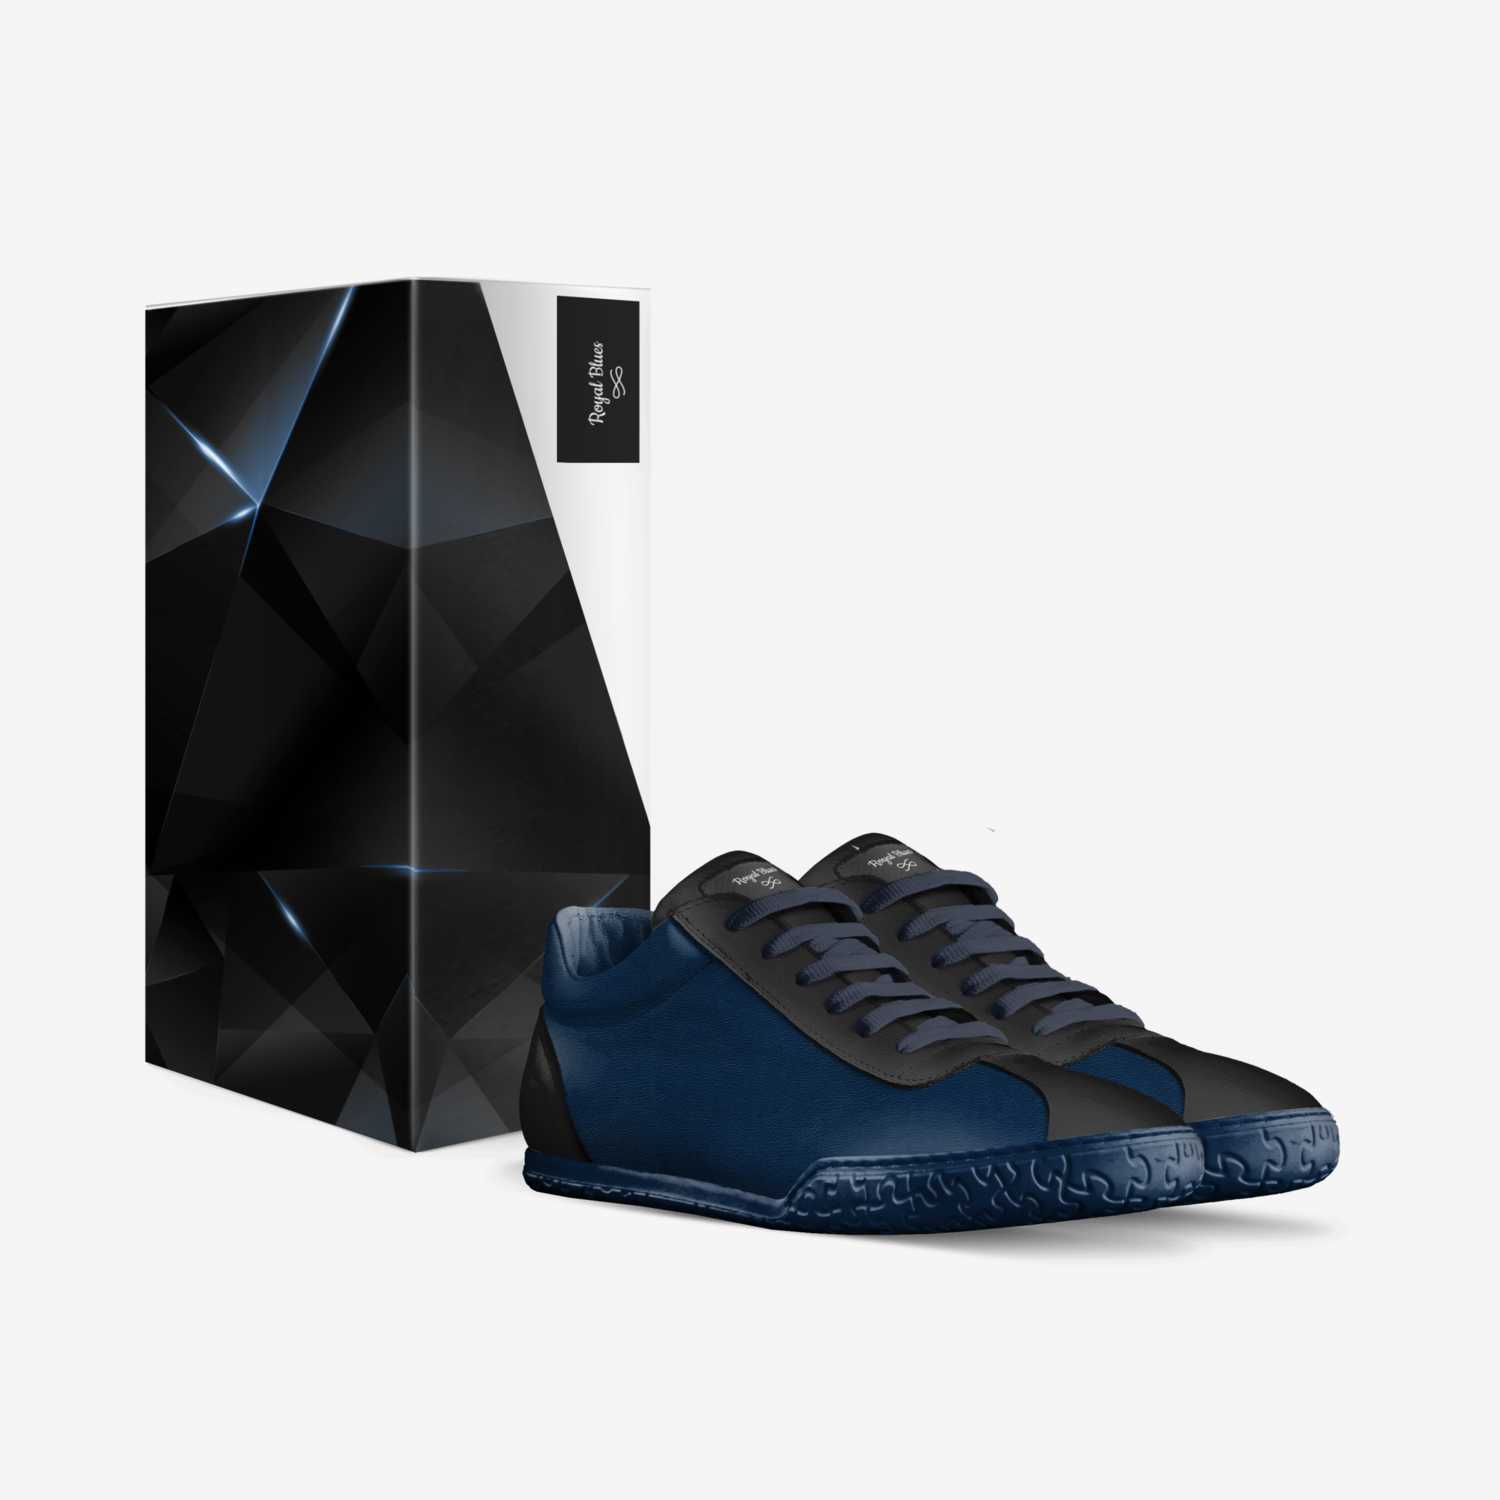 Royal Blues  custom made in Italy shoes by Arran Lett | Box view